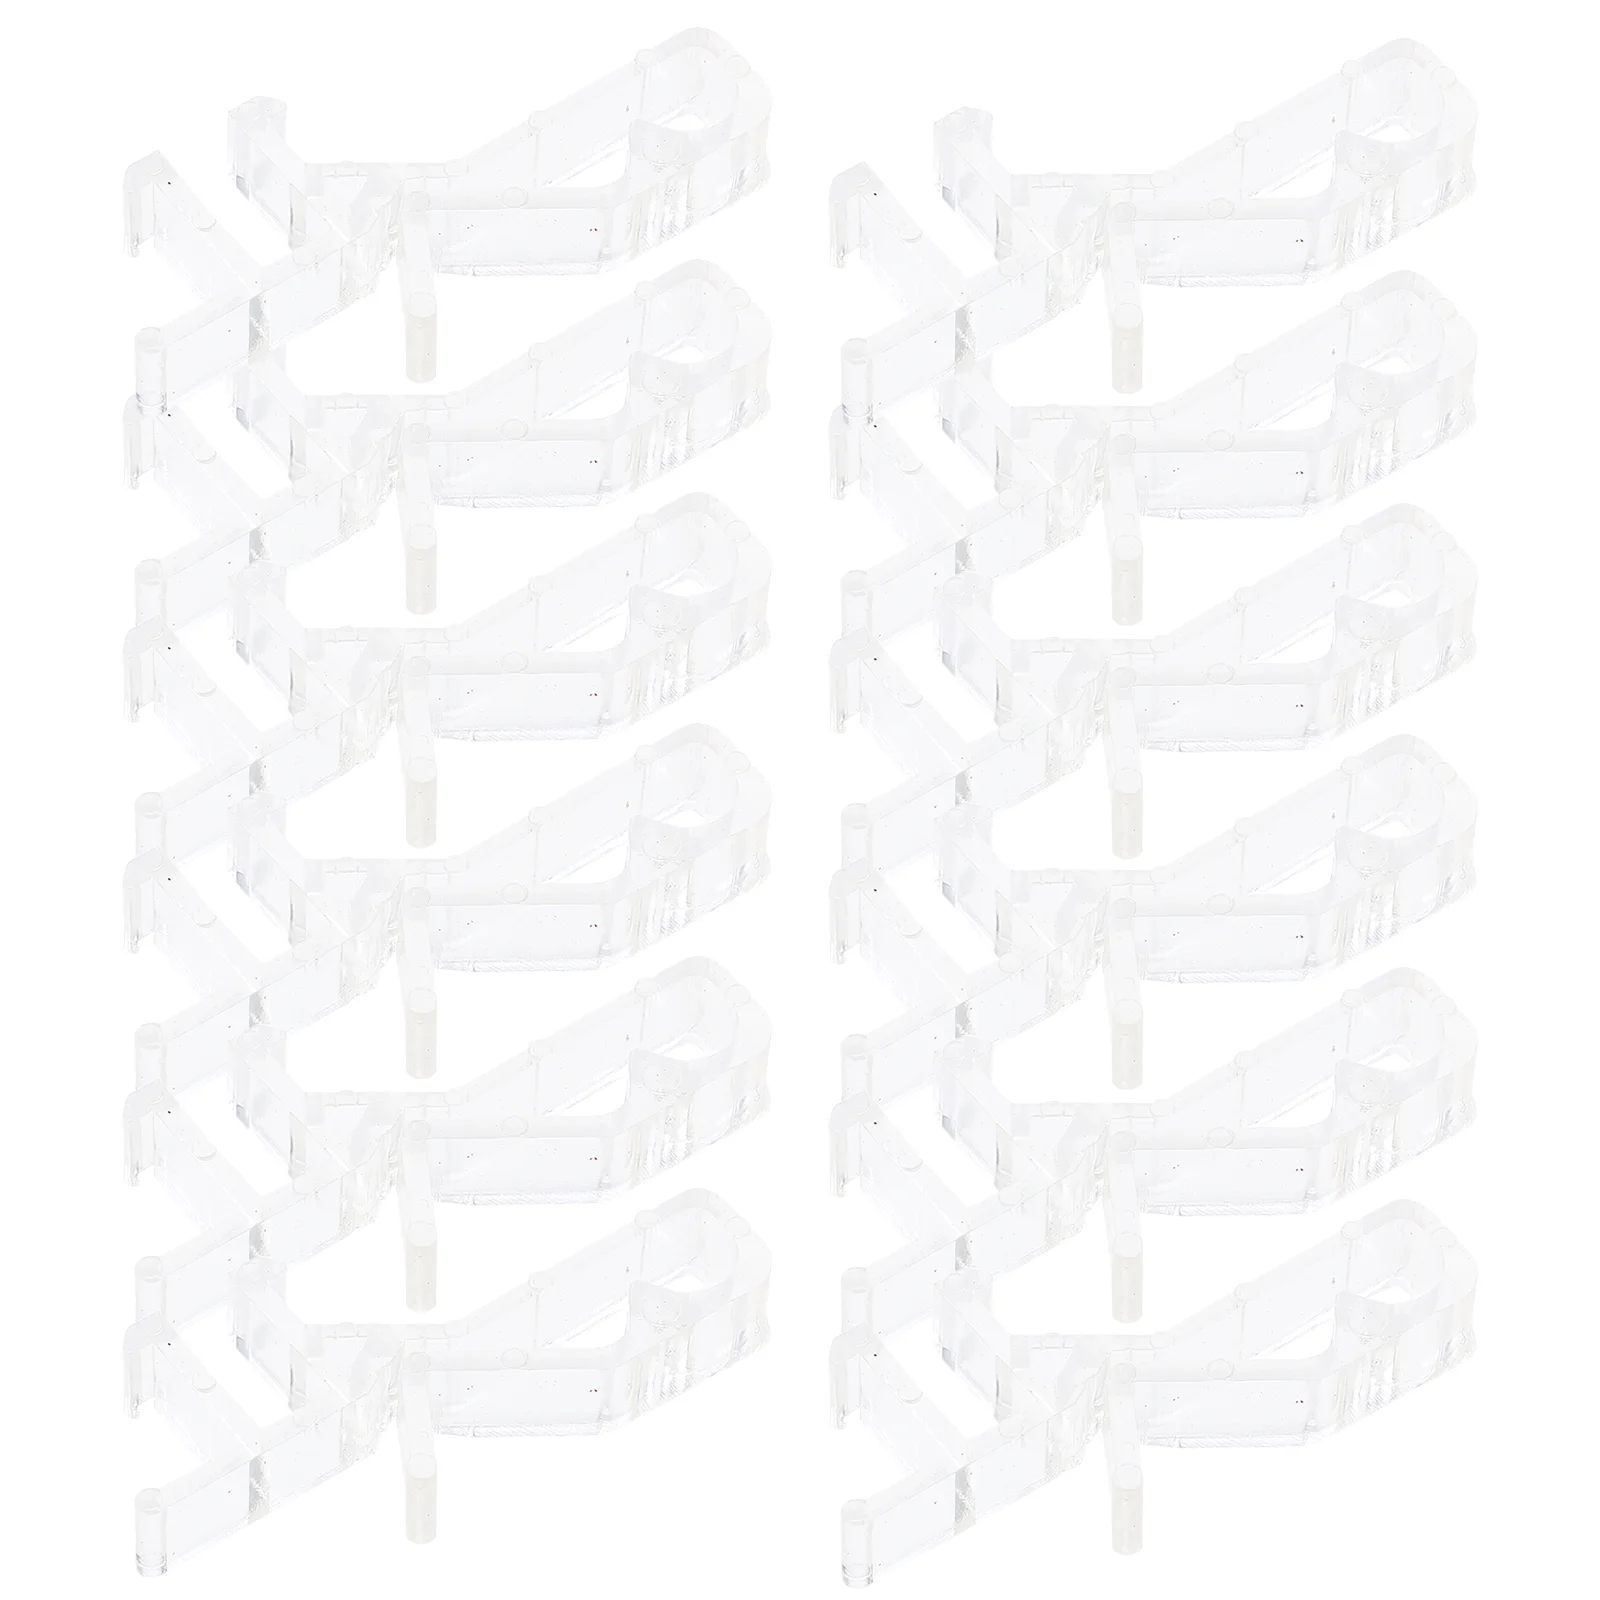 

12 Pcs Venetian Blinds Valance Clips Window Vertical Sheer Curtain Clamps Replacement Parts Accessories Retainer